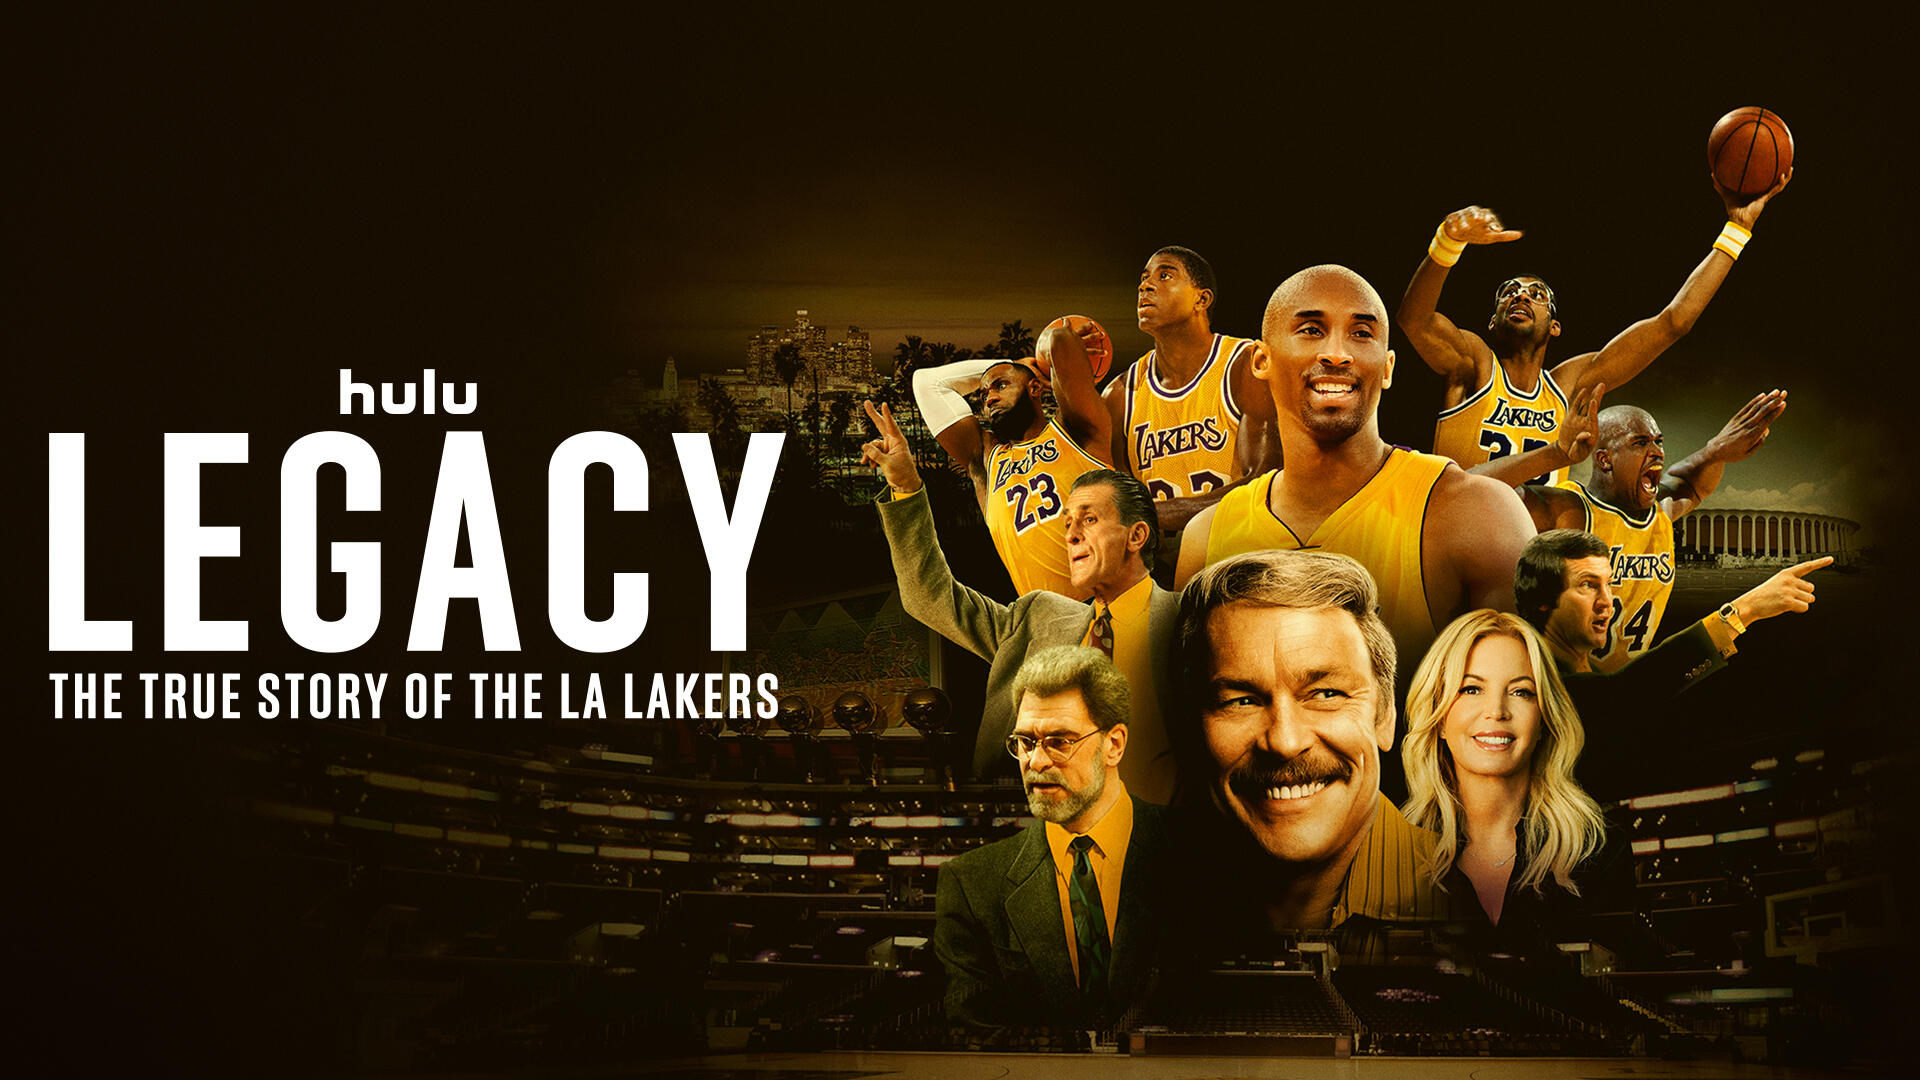 Legacy: The True Story of The LA Lakers -- Season 1 -- “Legacy: The True Story of the LA Lakers” captures the remarkable rise and unprecedented success of one of the most dominant and iconic franchises in professional sports. Featuring exclusive access to the Buss Family and probing, revealing interviews with players, coaches, and front office execs, this 10-part documentary series chronicles this extraordinary story from the inside – told only by the people who lived it. When charismatic real estate tycoon Dr. Jerry Buss purchased the Los Angeles Lakers in a wildly risky and complex business deal, nobody could’ve predicted just how much success was to come. Kicking off the “Showtime” era in 1979, the notorious L.A.-playboy pioneered the business of basketball. He raised the price of floor seats, introduced dancers and a live band, opened an exclusive private club inside the arena, and cultivated famous fans in Hollywood. Over the last 40 years, the team captured 11 titles and retired the jerseys of some of the NBA’s most legendary players. Today, Dr. Buss's empire is now worth more than $5 billion. But all of that success did not come easy. Along with notorious feuds, career-ending illnesses, and a bevy of insurmountable on-court obstacles, the Lakers have also weathered intense drama off the court – within Dr. Buss’s own family. Running the franchise as a “mom and pop” operation, Dr. Buss gave his children front office jobs with the understanding they would, someday, inherit his kingdom. But sibling rivalry, interpersonal conflict, and corporate unrest threatened to destroy everything Dr. Buss worked so hard to build. Ultimately, “Legacy: The True Story of the LA Lakers” is about family, business, and power –and how all three must be harnessed to achieve greatness. (Courtesy of Hulu)